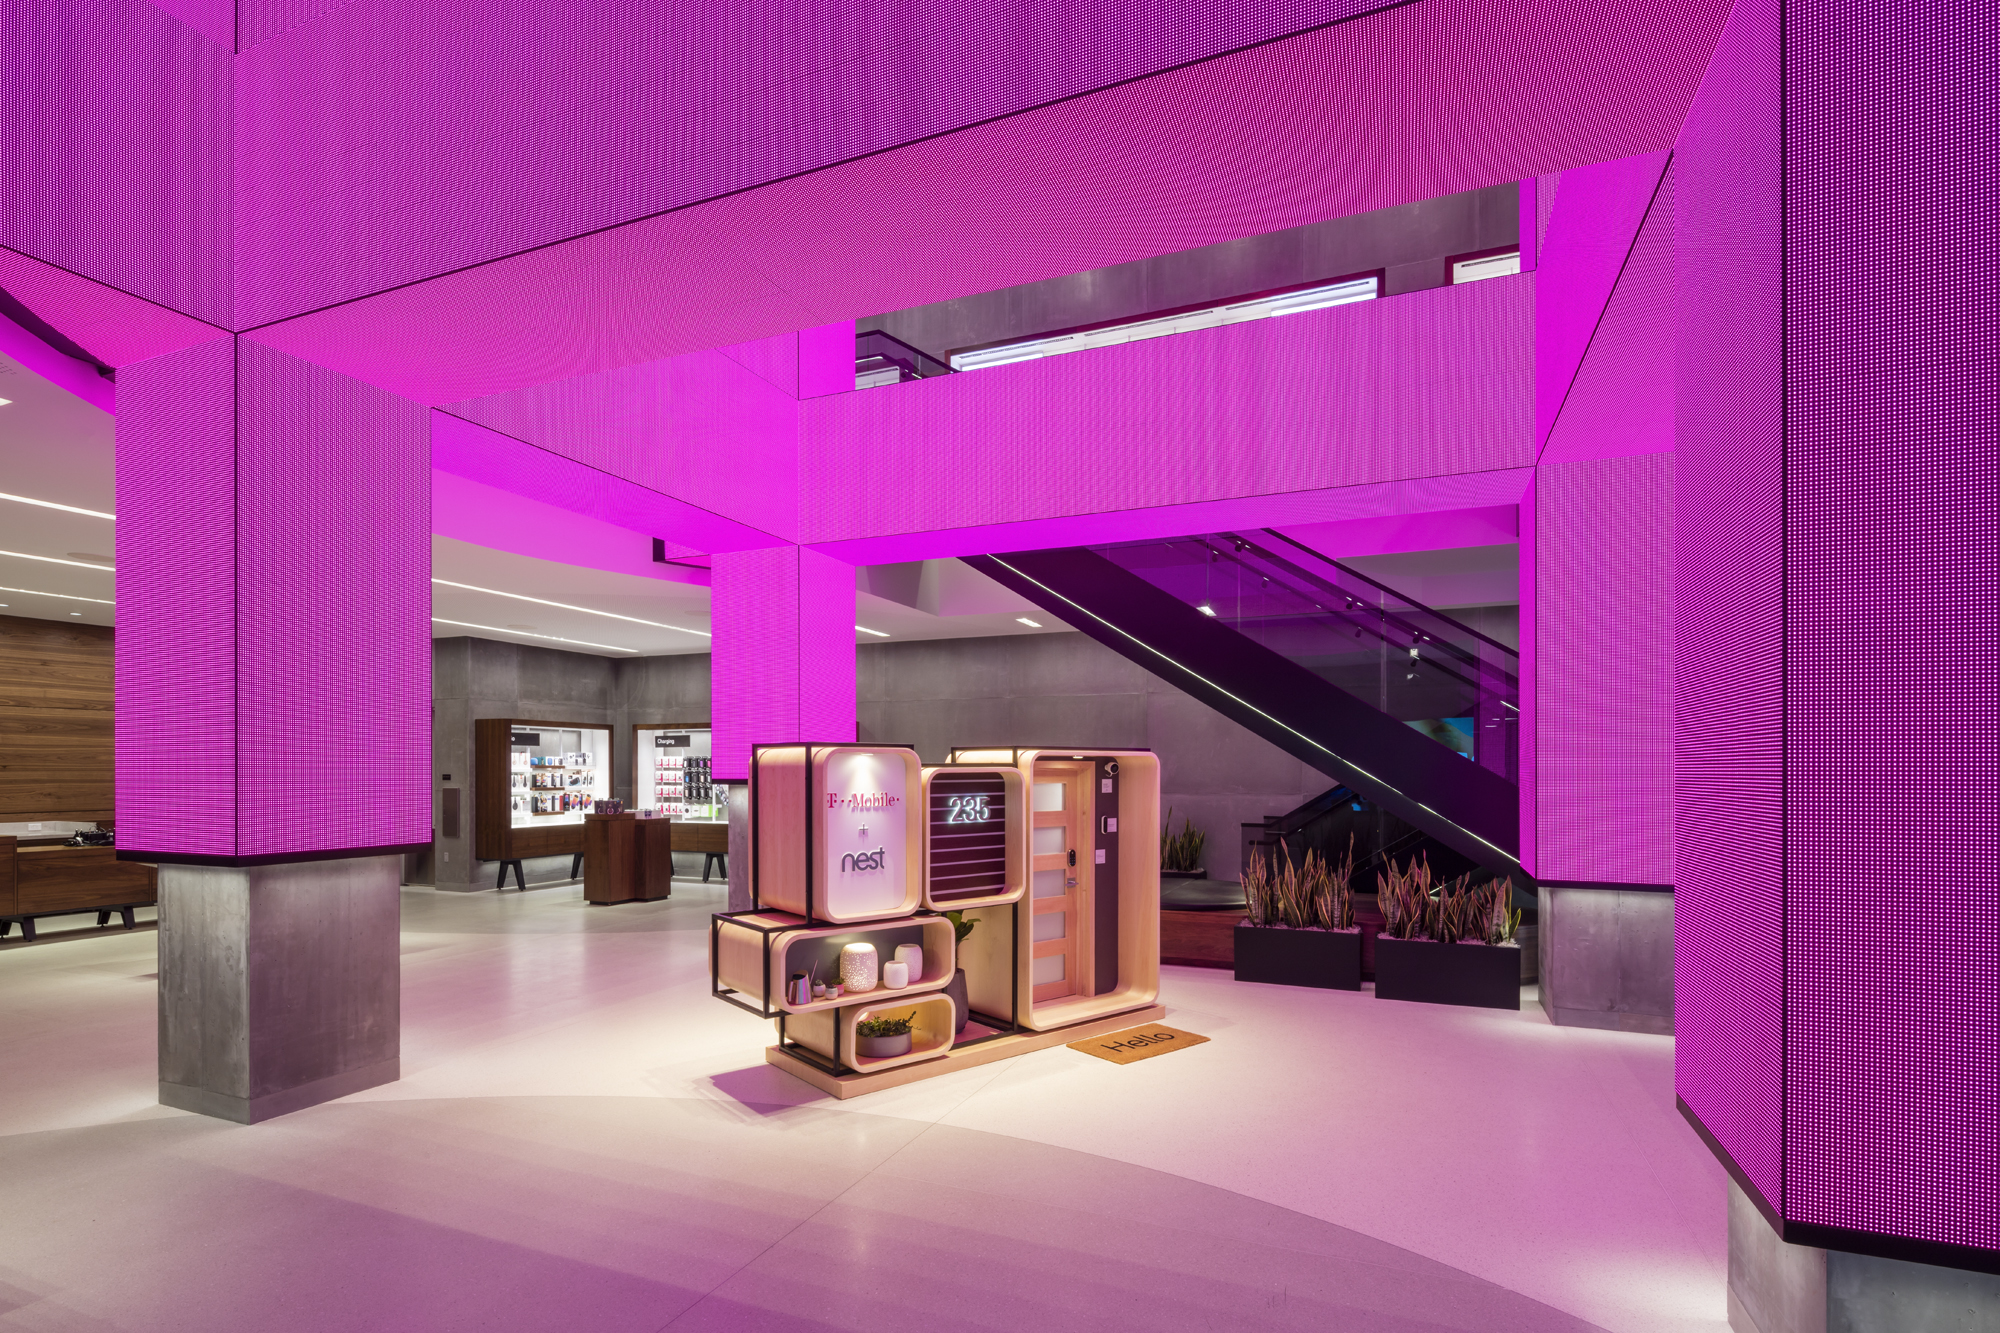 T-Mobile Signature Store, San Francisco, CA - constructed by Retail Construction Services, Inc.